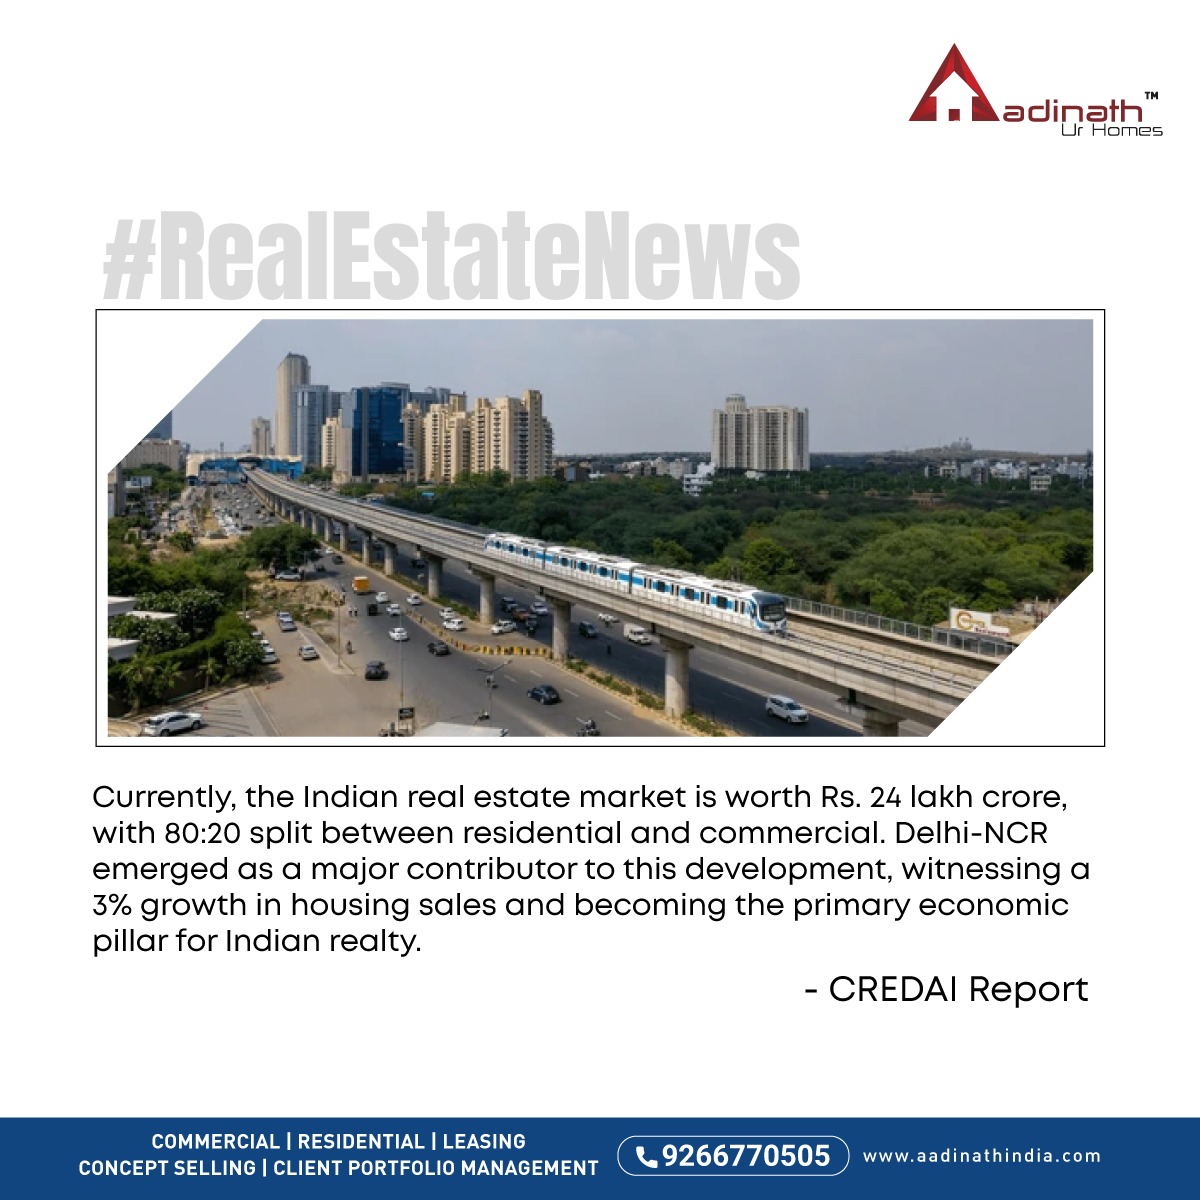 Real estate has always been and continues to be a major contributor in the economic expansion of India. Here are some numbers. #RealEstate #India #CommercialRealEstate #ResidentialRealEstate #Construction #Investing #AadinathIndia #AadinathUrHomes #OfficeSpace #RetailSpace